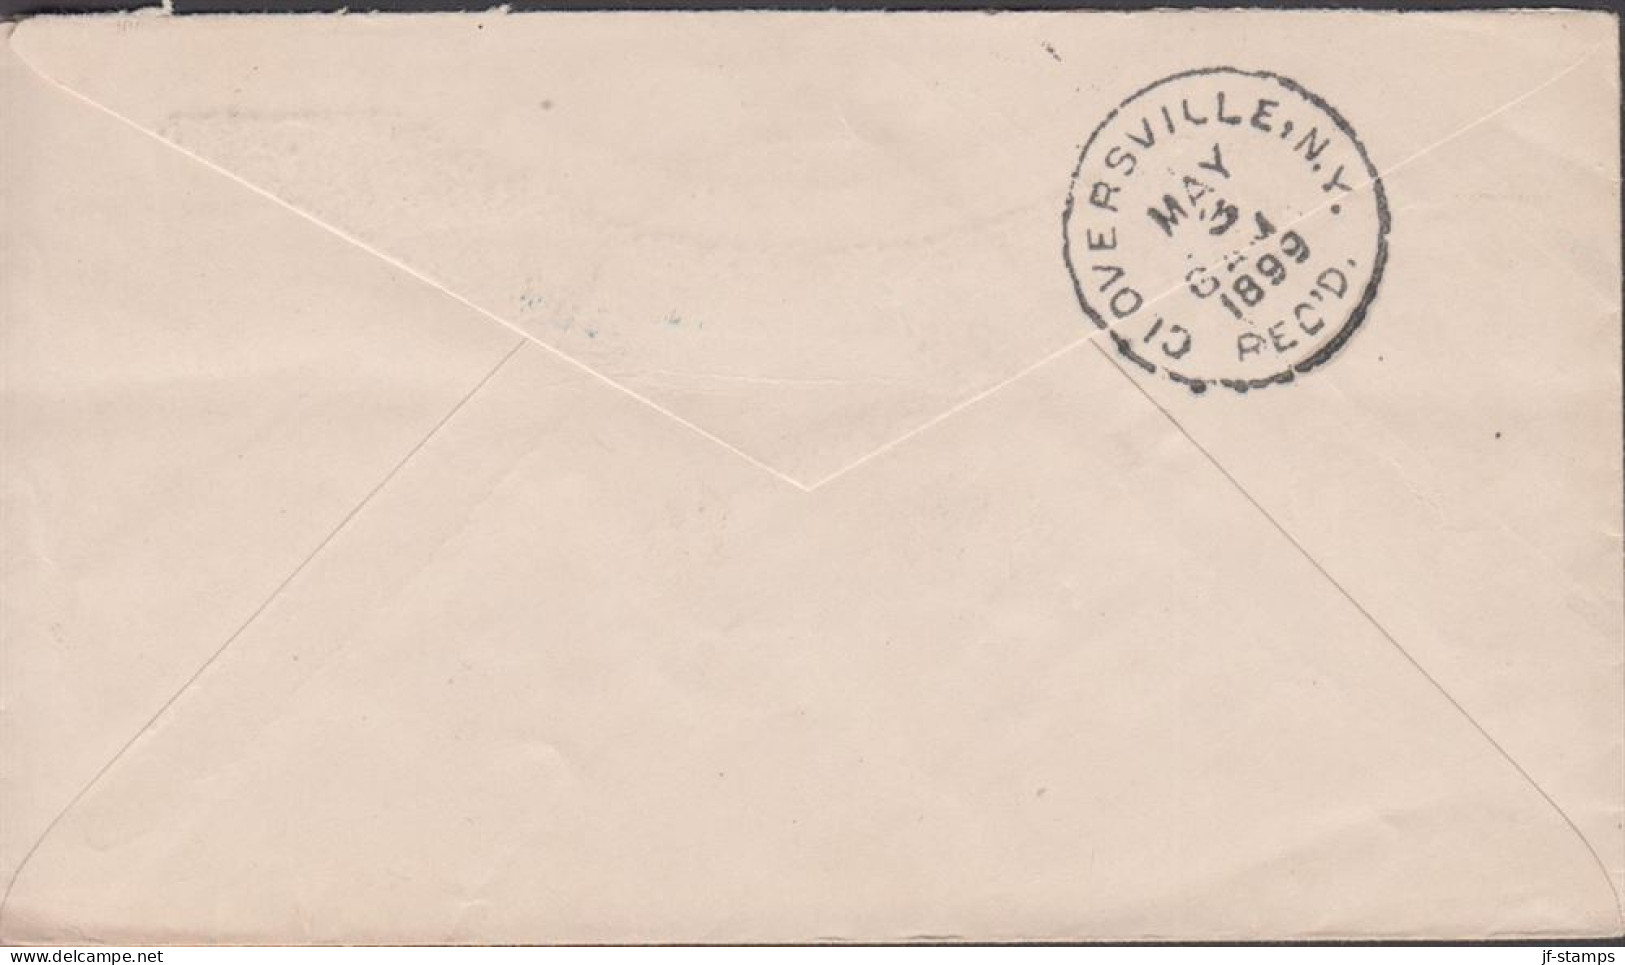 1899. CANADA, Victoria. 2 CENTS On Cover To Cloversville, USA Cancelled WINNIPIG 7 AP 29 99 CA... (Michel 64) - JF439376 - Lettres & Documents